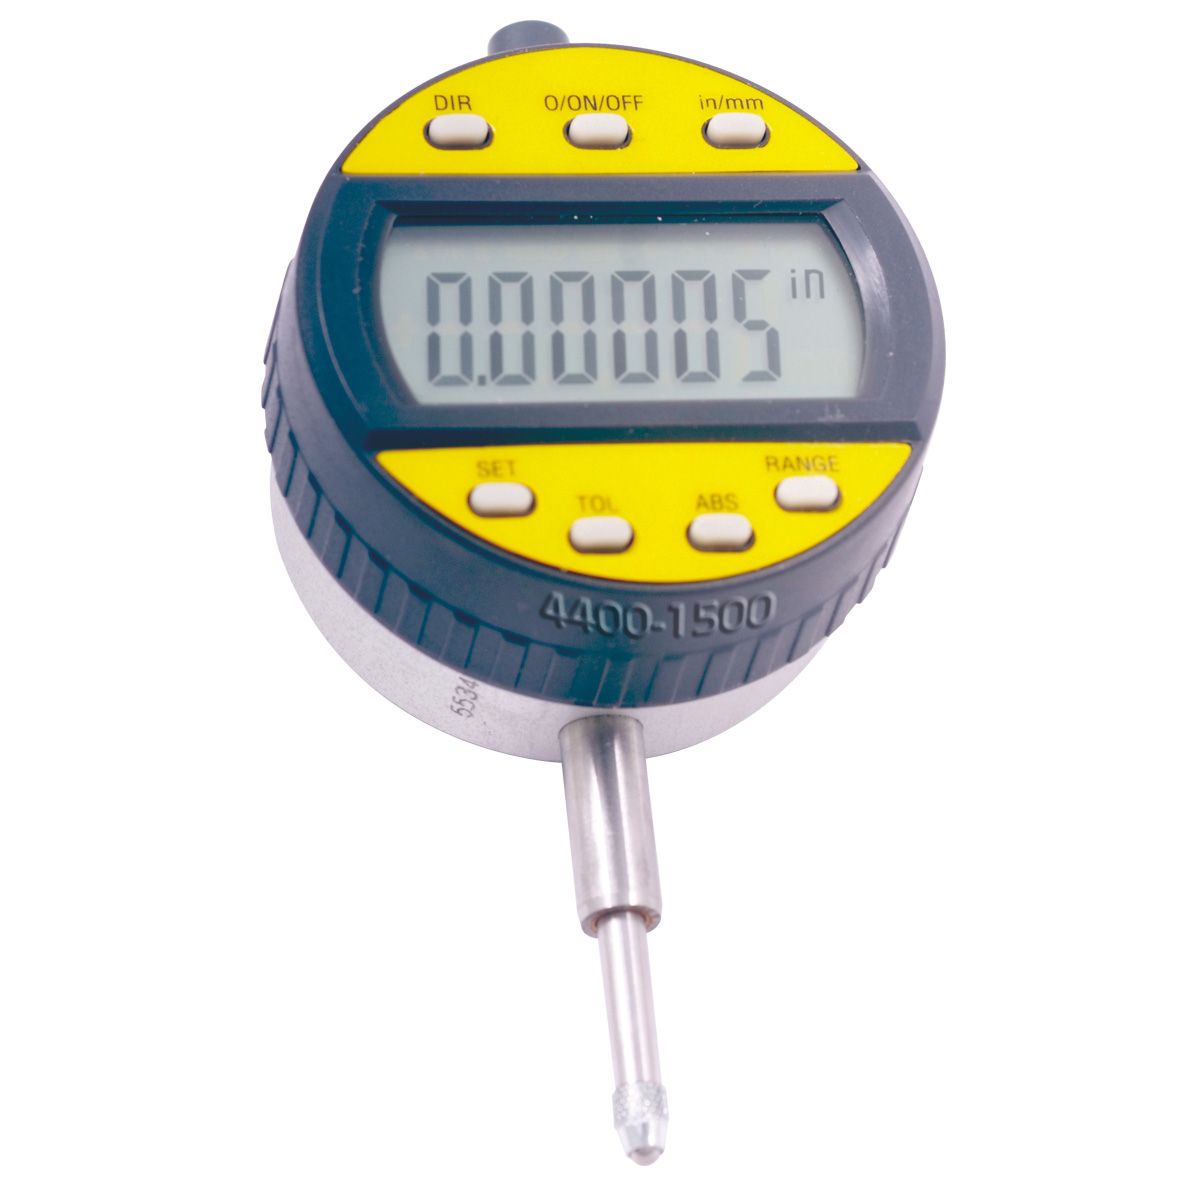 0-0.5/0-12.7MM ELECTRONIC INDICATOR WITH .00005 / .001MM RESOLUTION (4400-1500)